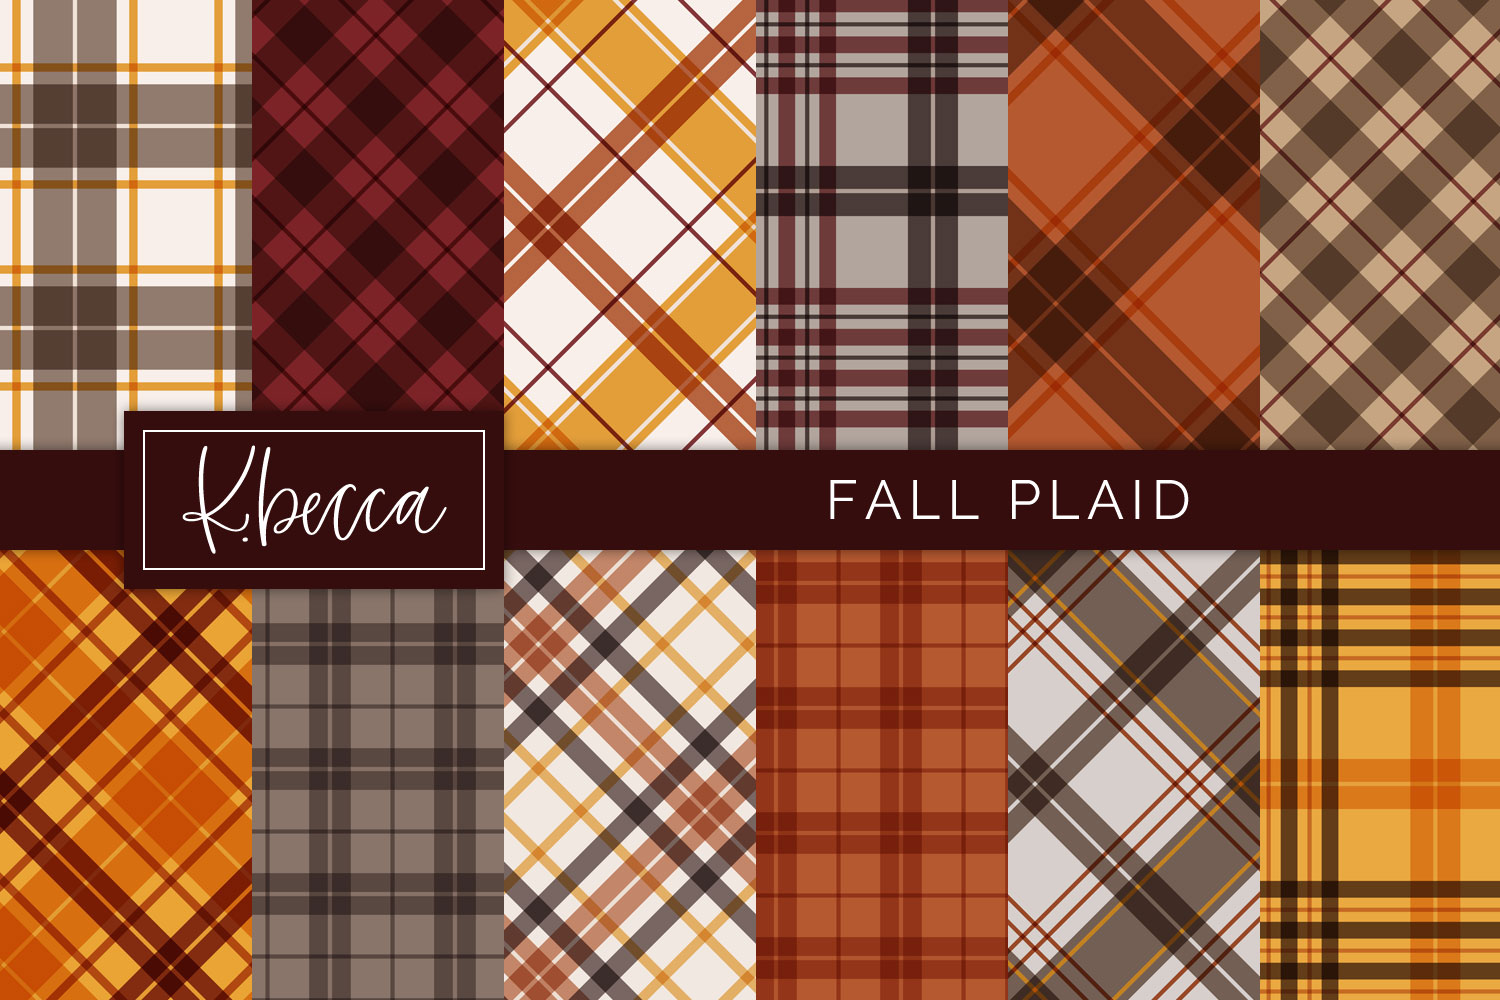 Apple On A Plaid Background Fall Plaid Background Patterns Seamless.